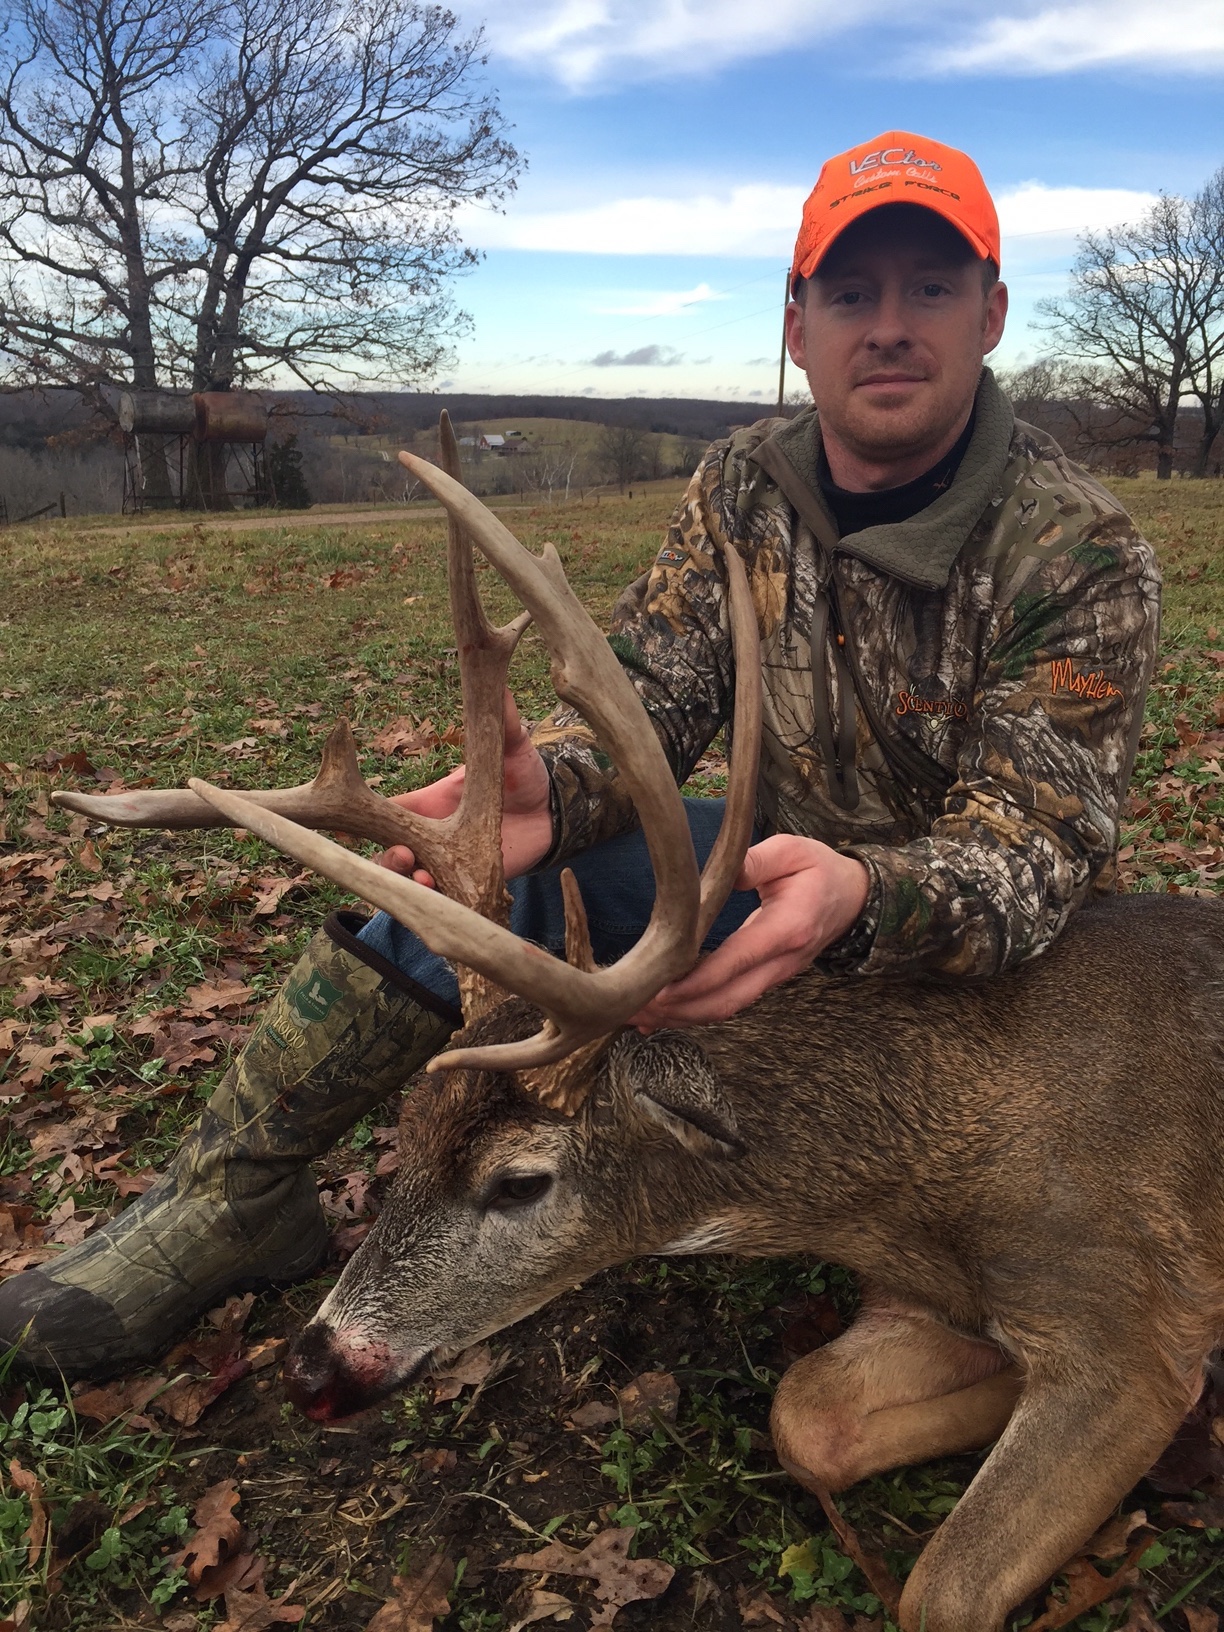 mdc-approves-new-deer-hunting-dates-and-regulations-conservation-federation-of-missouri